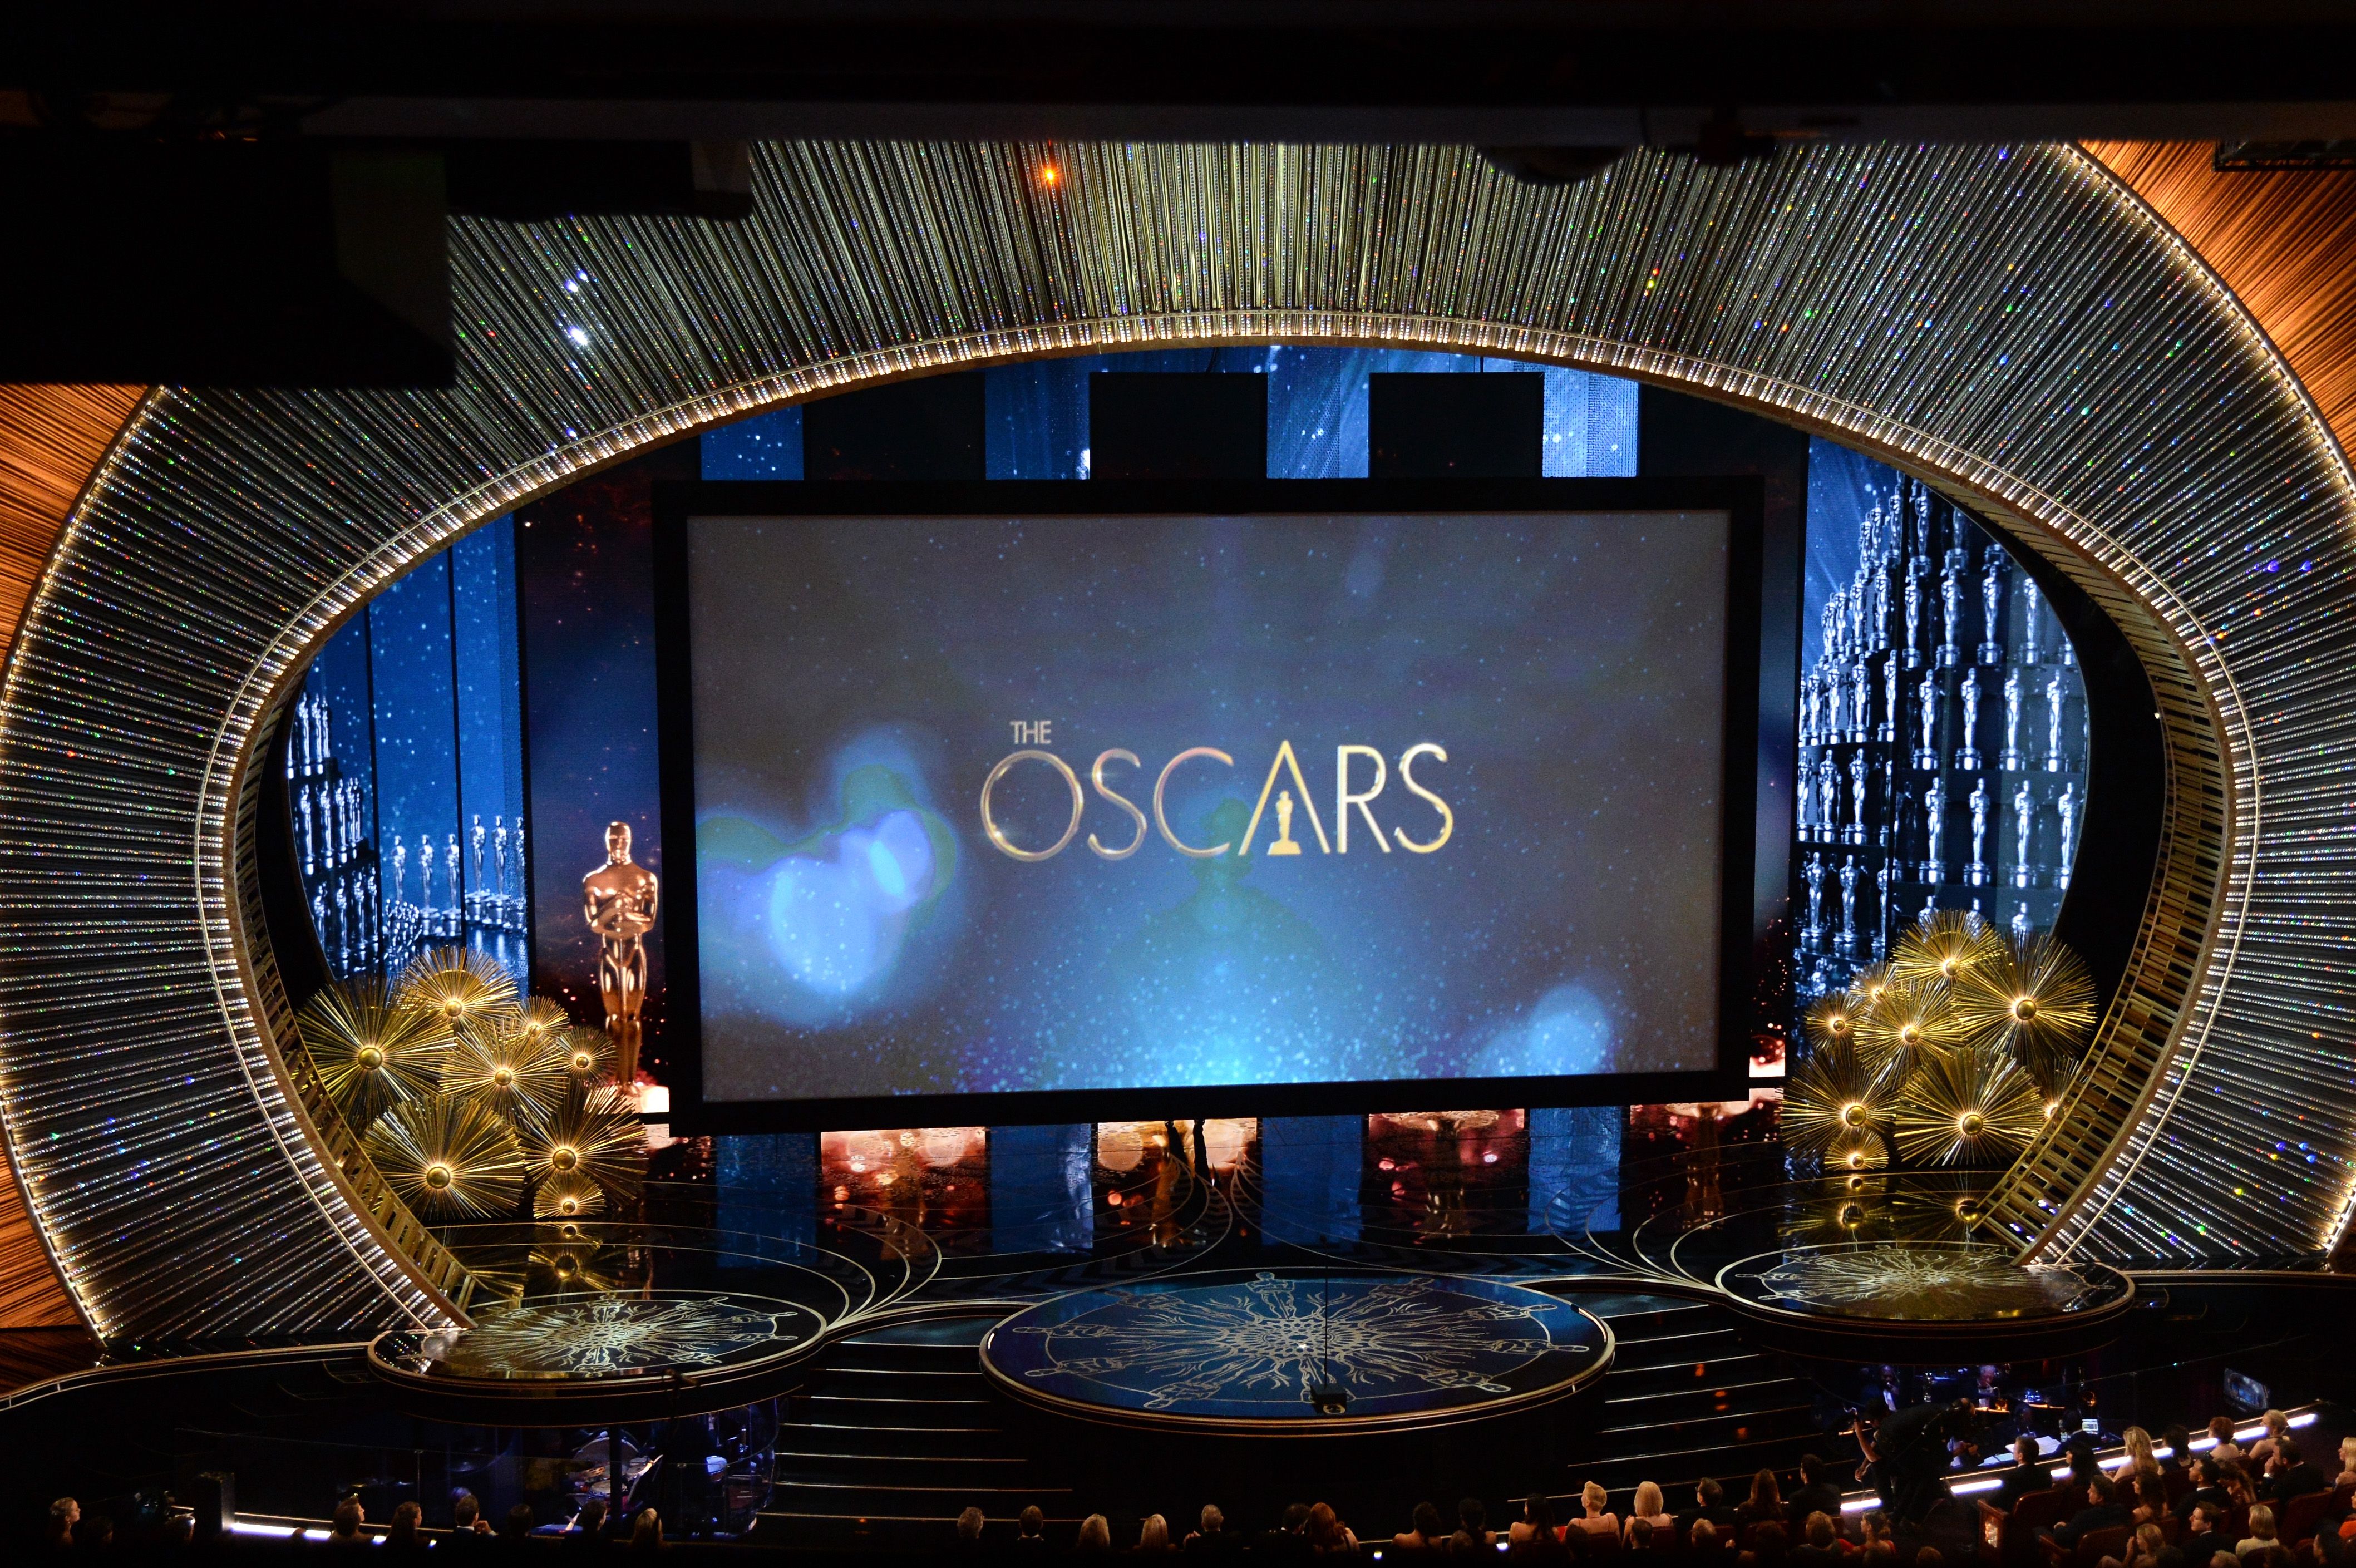 Coronavirus: Oscars 2021 postponed by two months due to COVID-19 disruption, Ents & Arts News